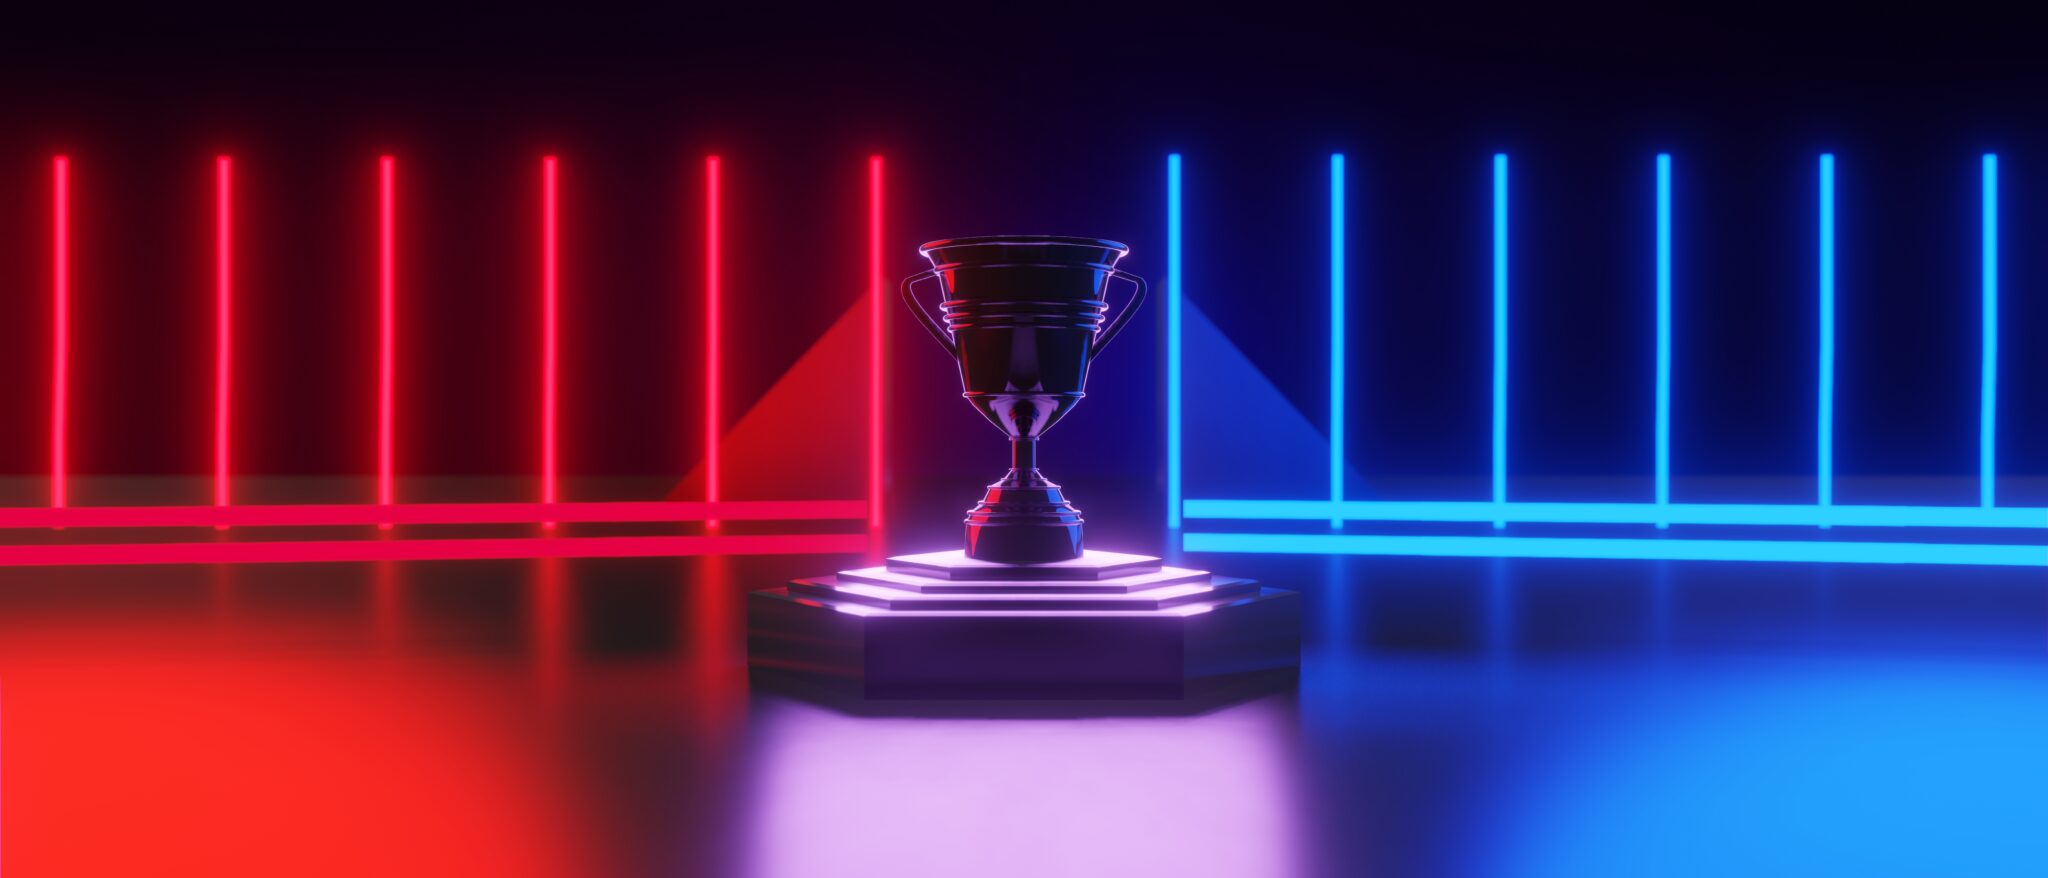 Coloured image of a large trophy placed on a podium centre stage.